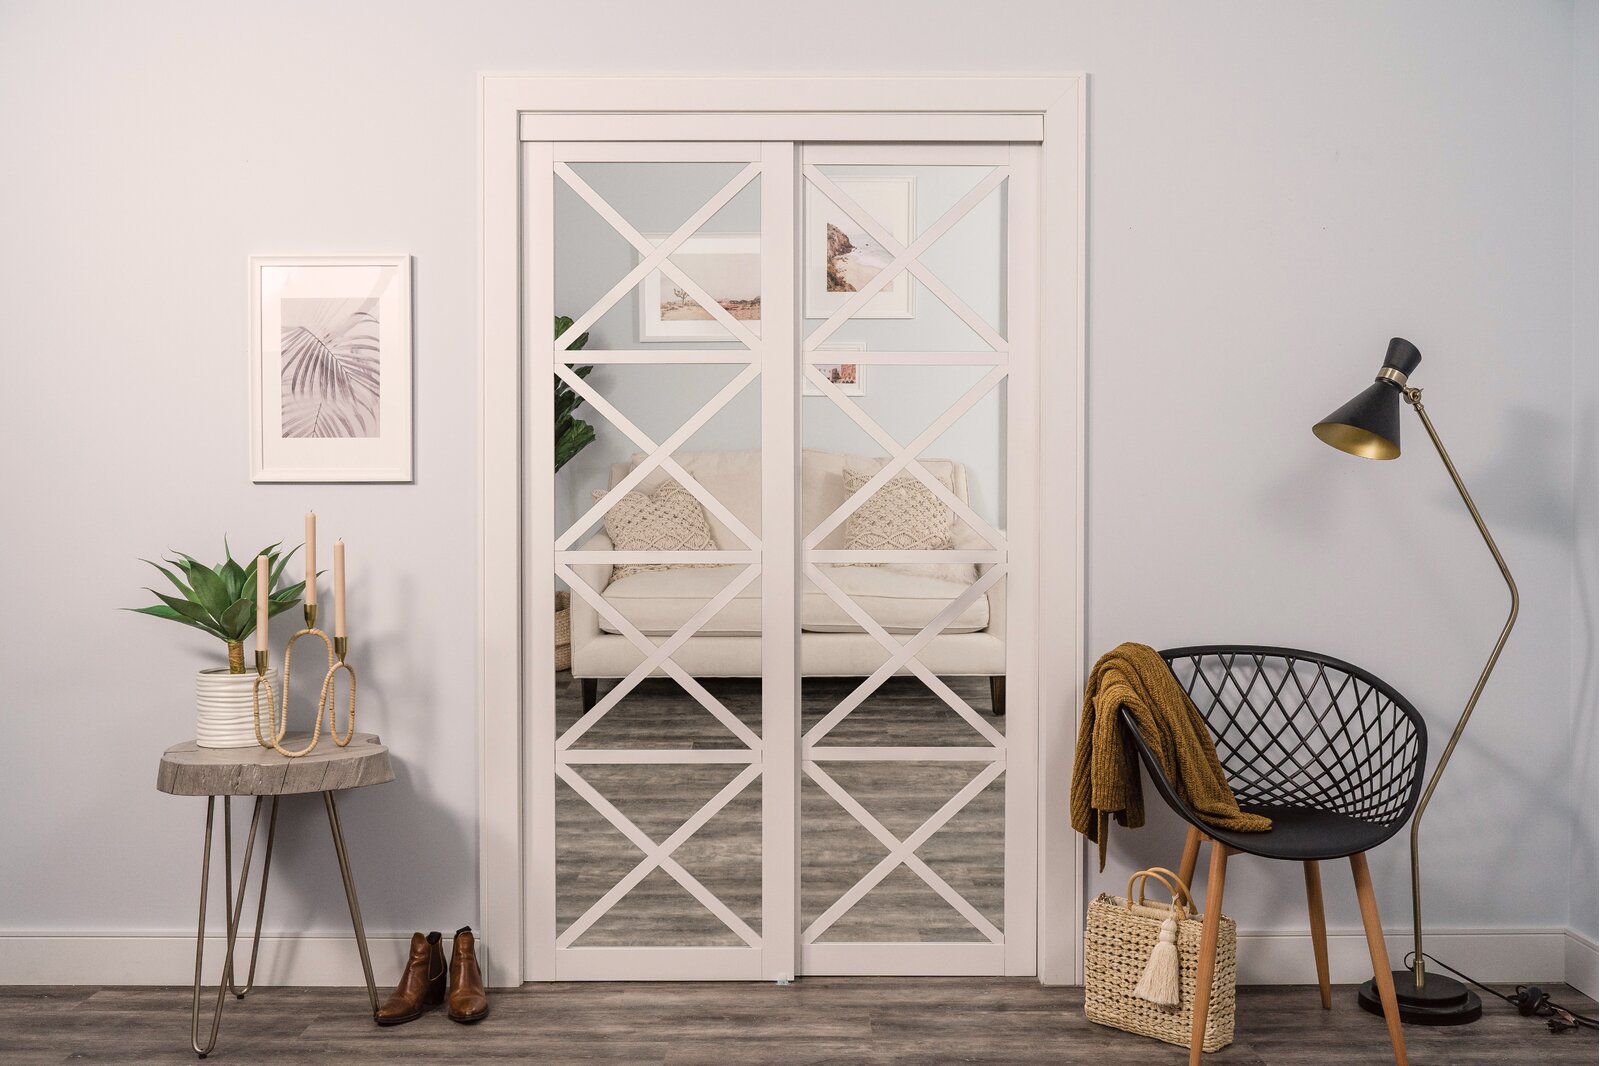 The Best Closet Door Styles For Your Home – Closets By Liberty